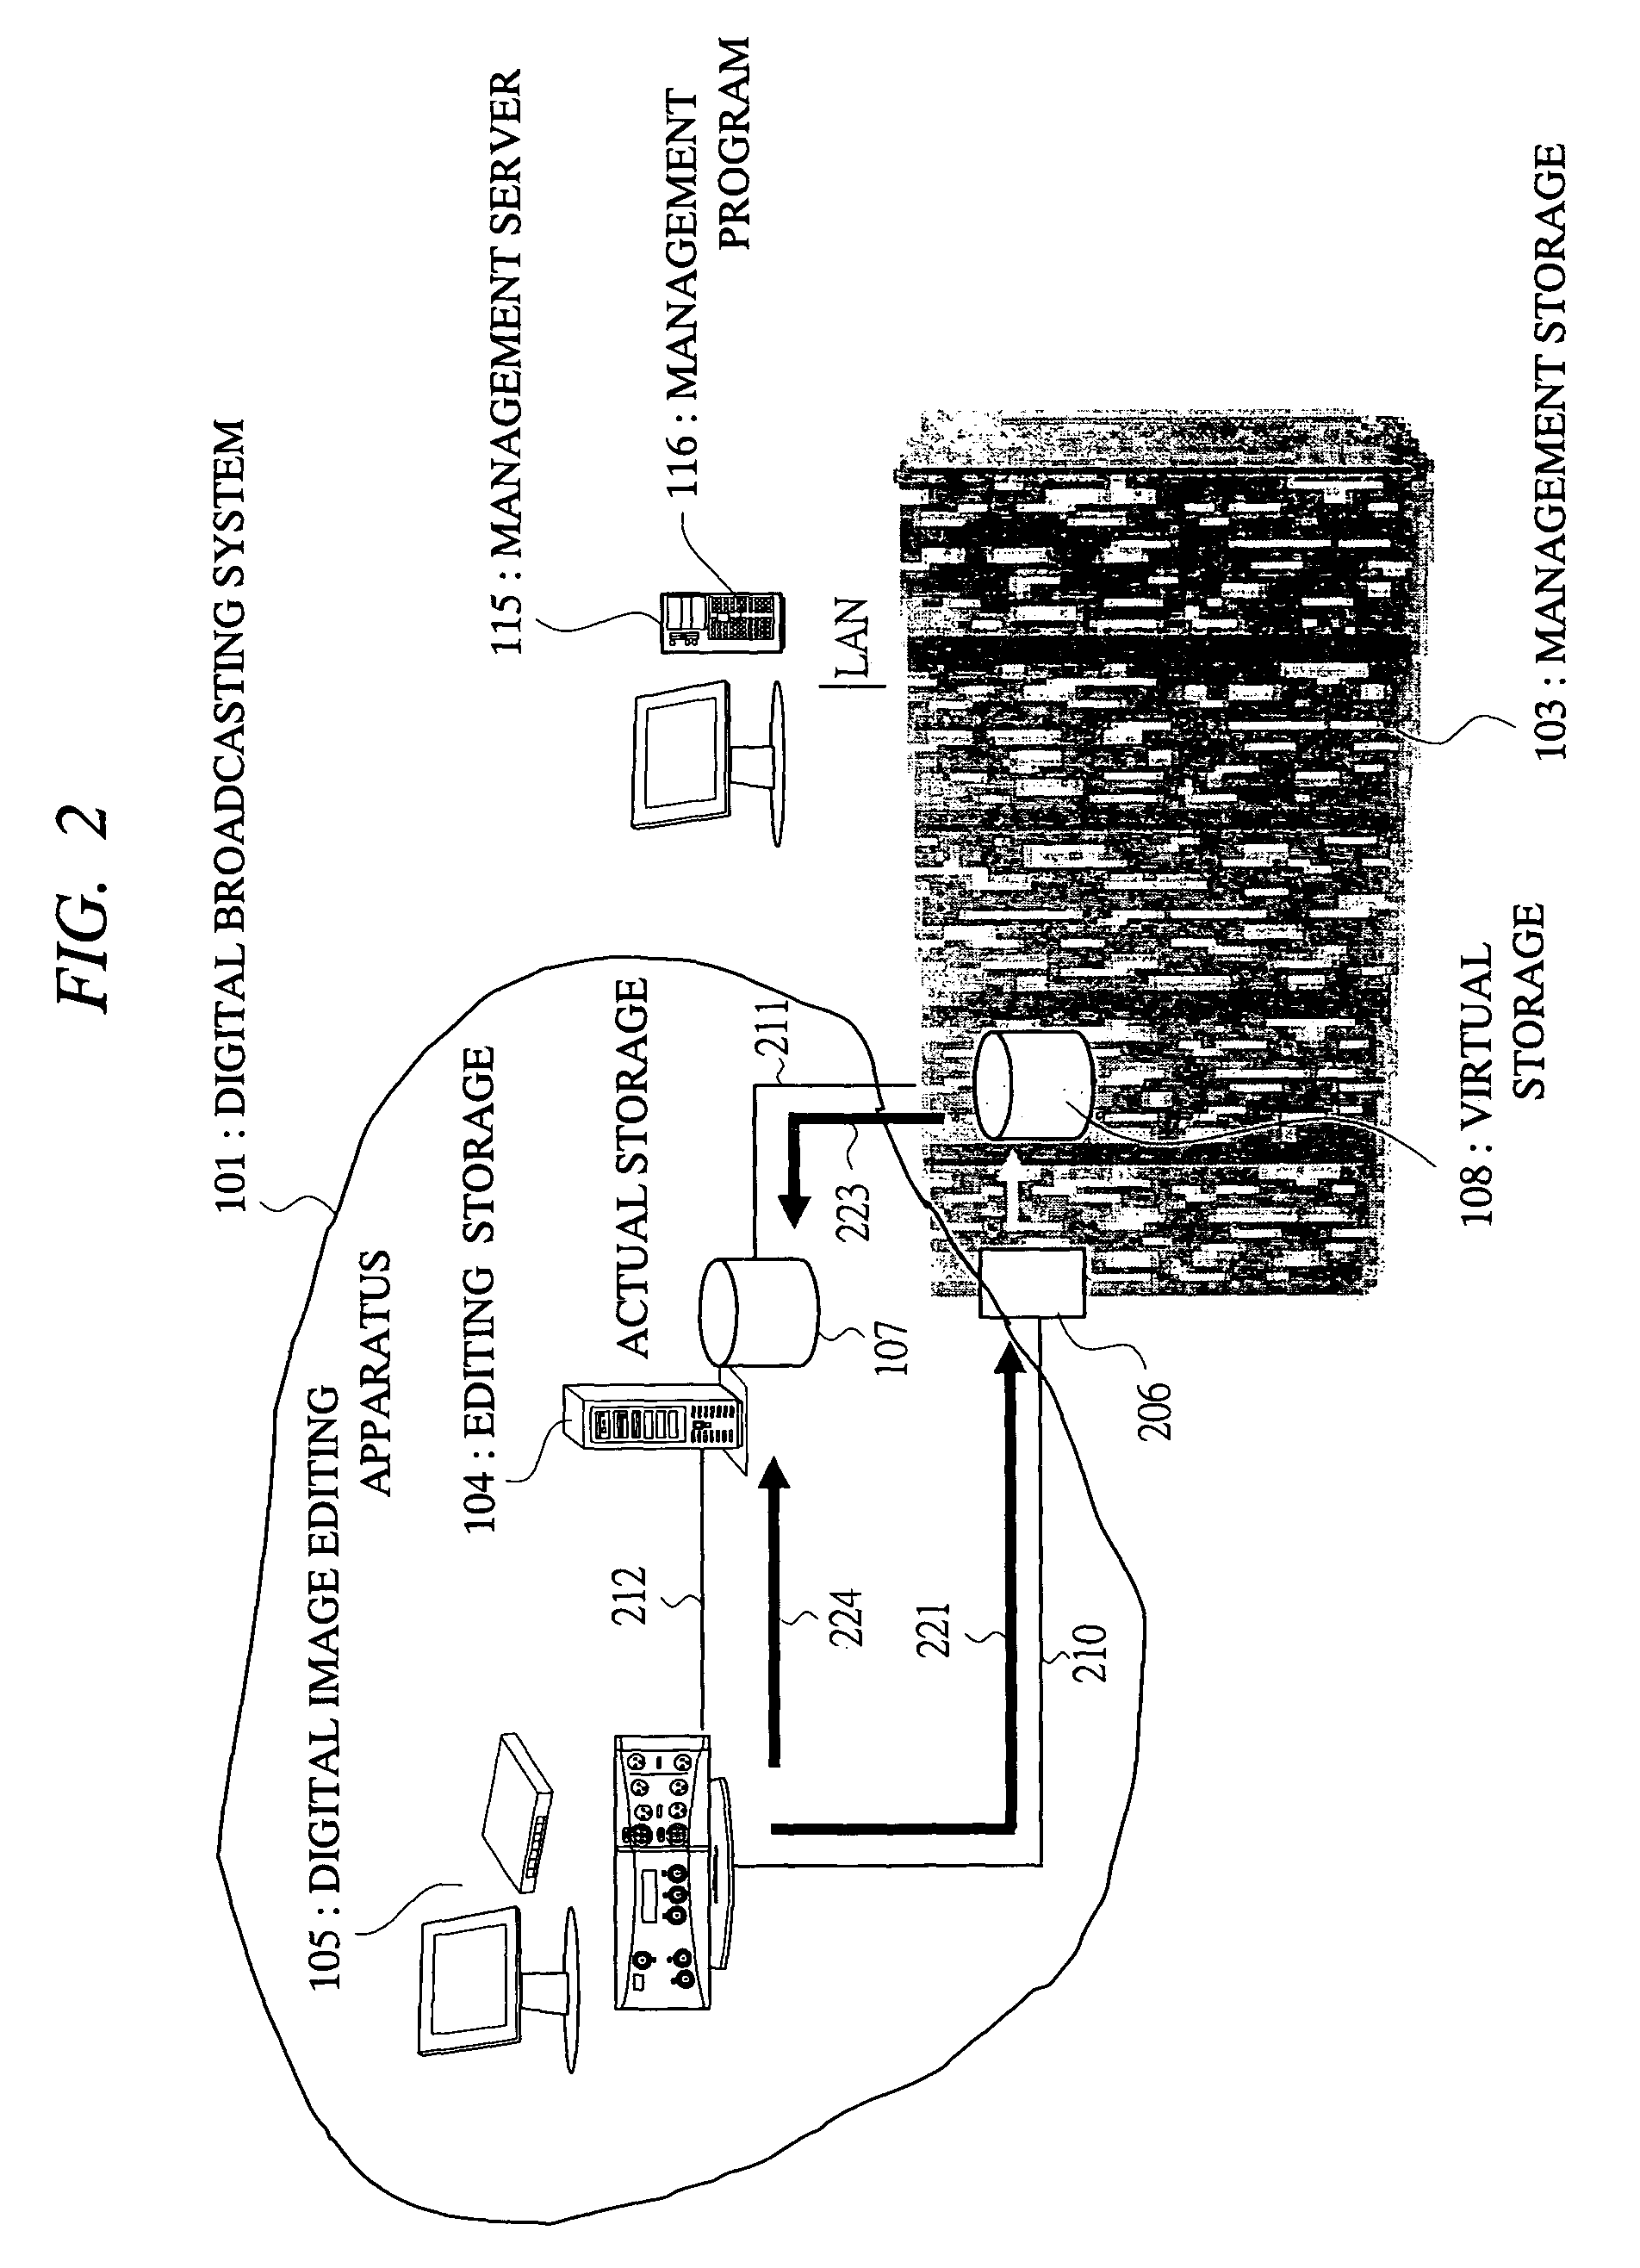 Storage system and digital broadcasting system